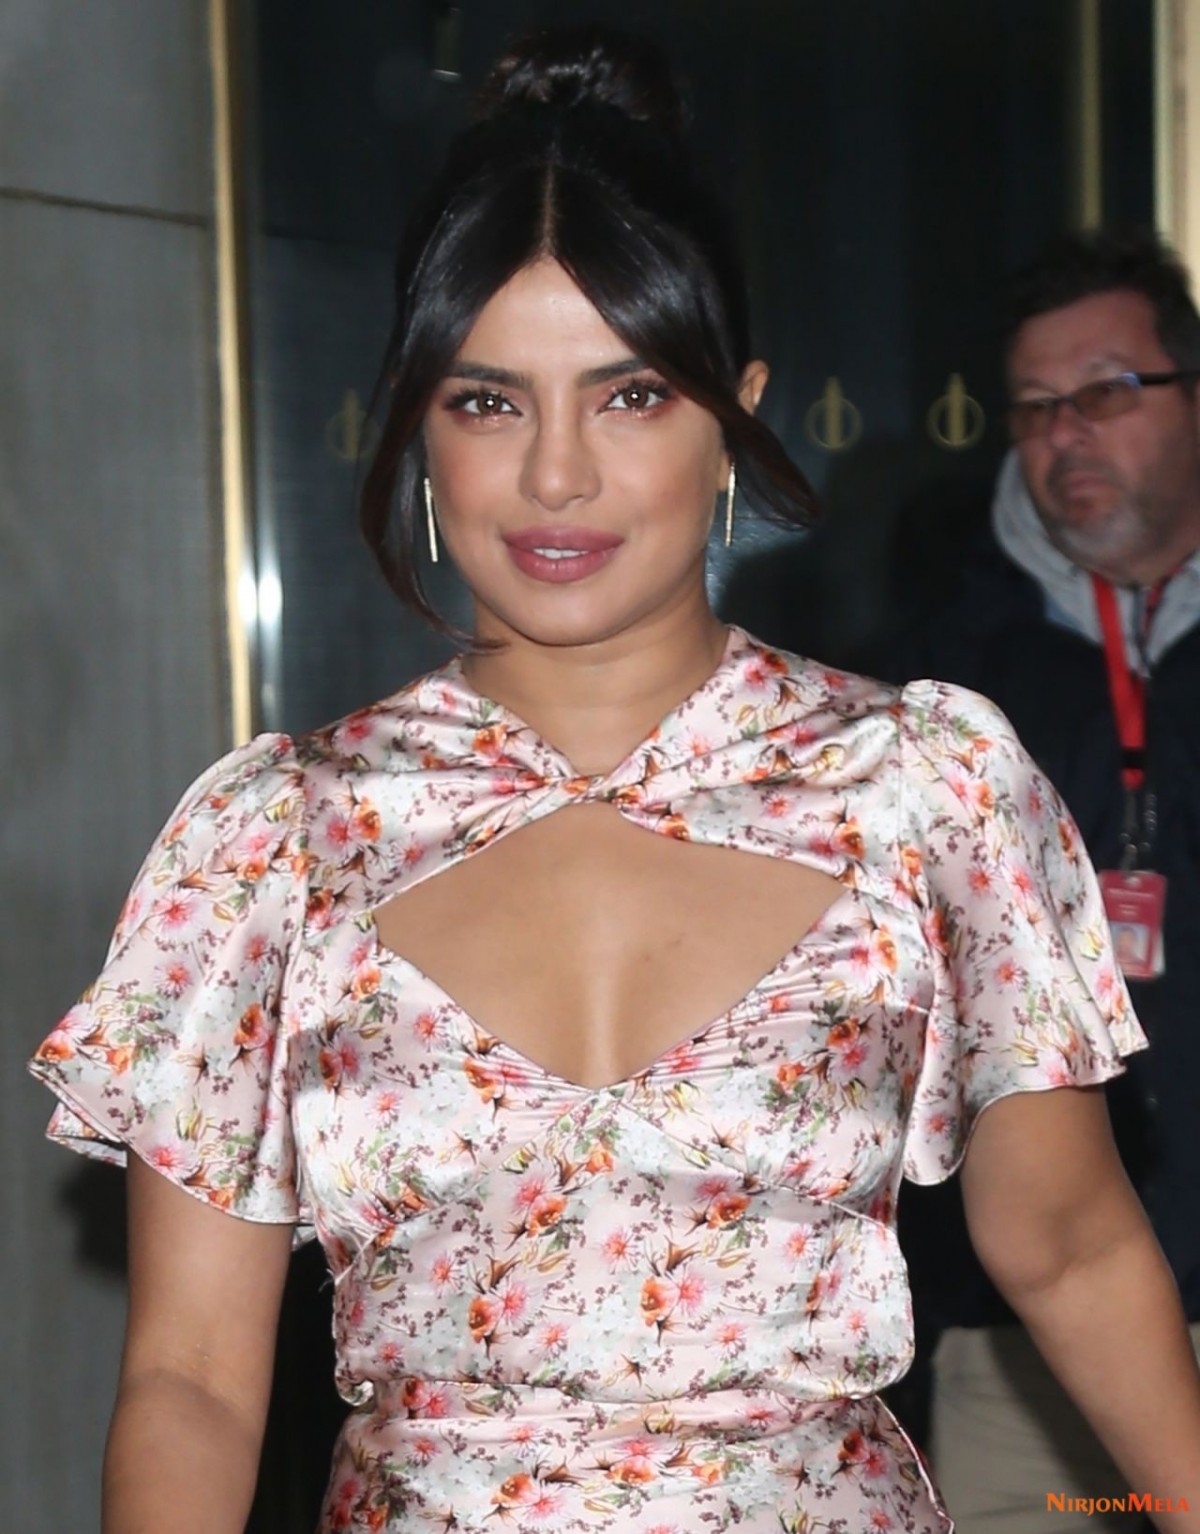 priyanka-chopra-style-arriving-at-the-today-show-in-new-york-10-08-2019-0.jpg